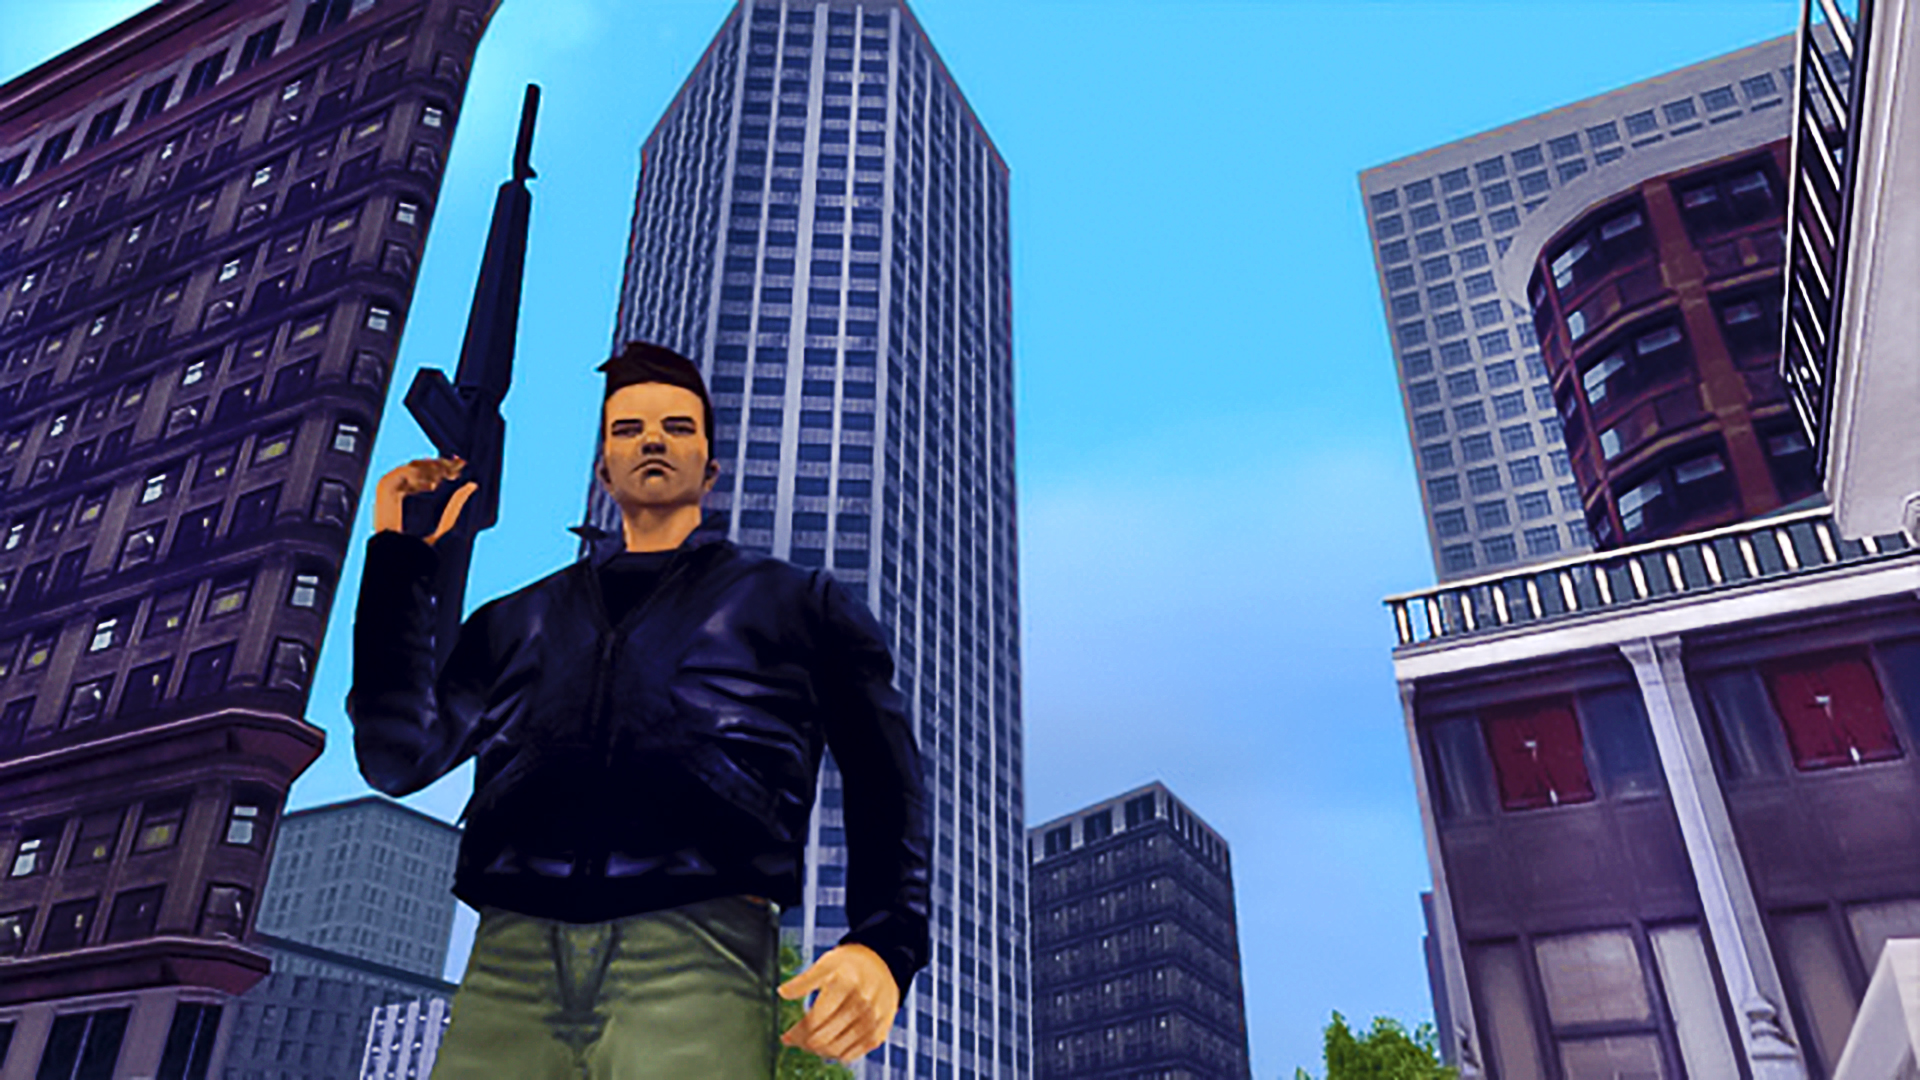 free download grand theft auto 3 definitive edition